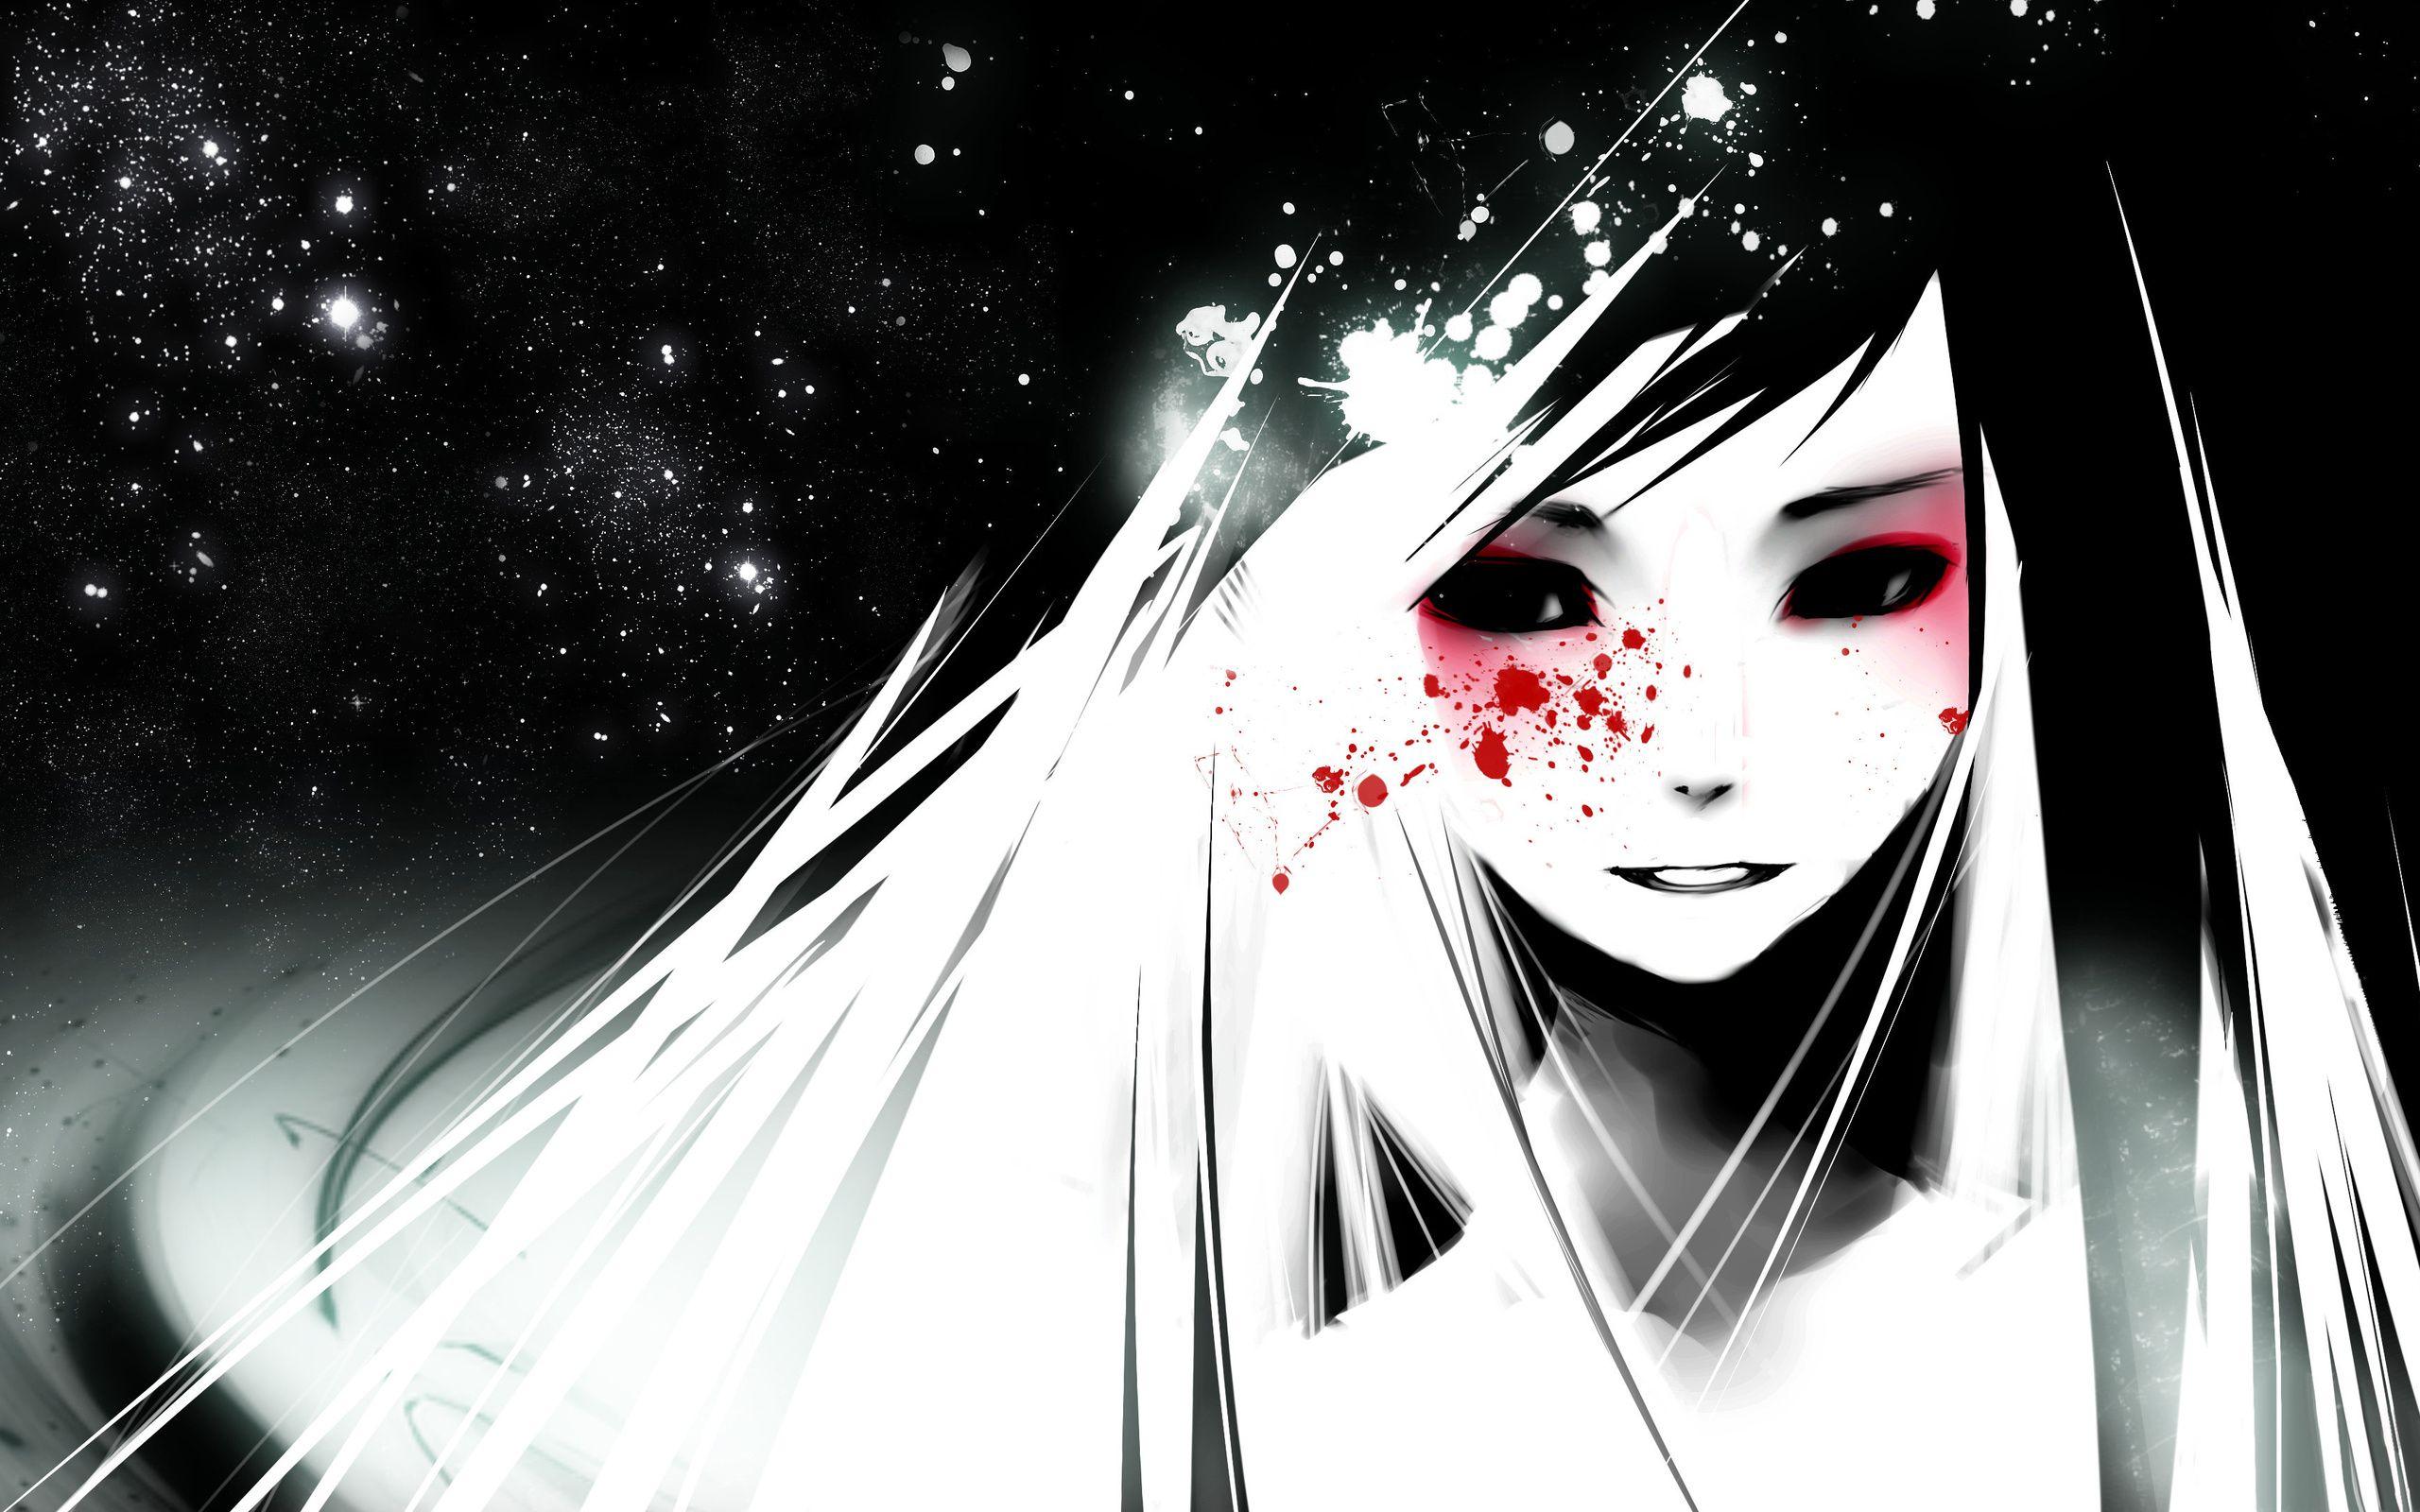 🔥 #creepy anime HD Photos & Wallpapers (50+ Images) - Page: 3